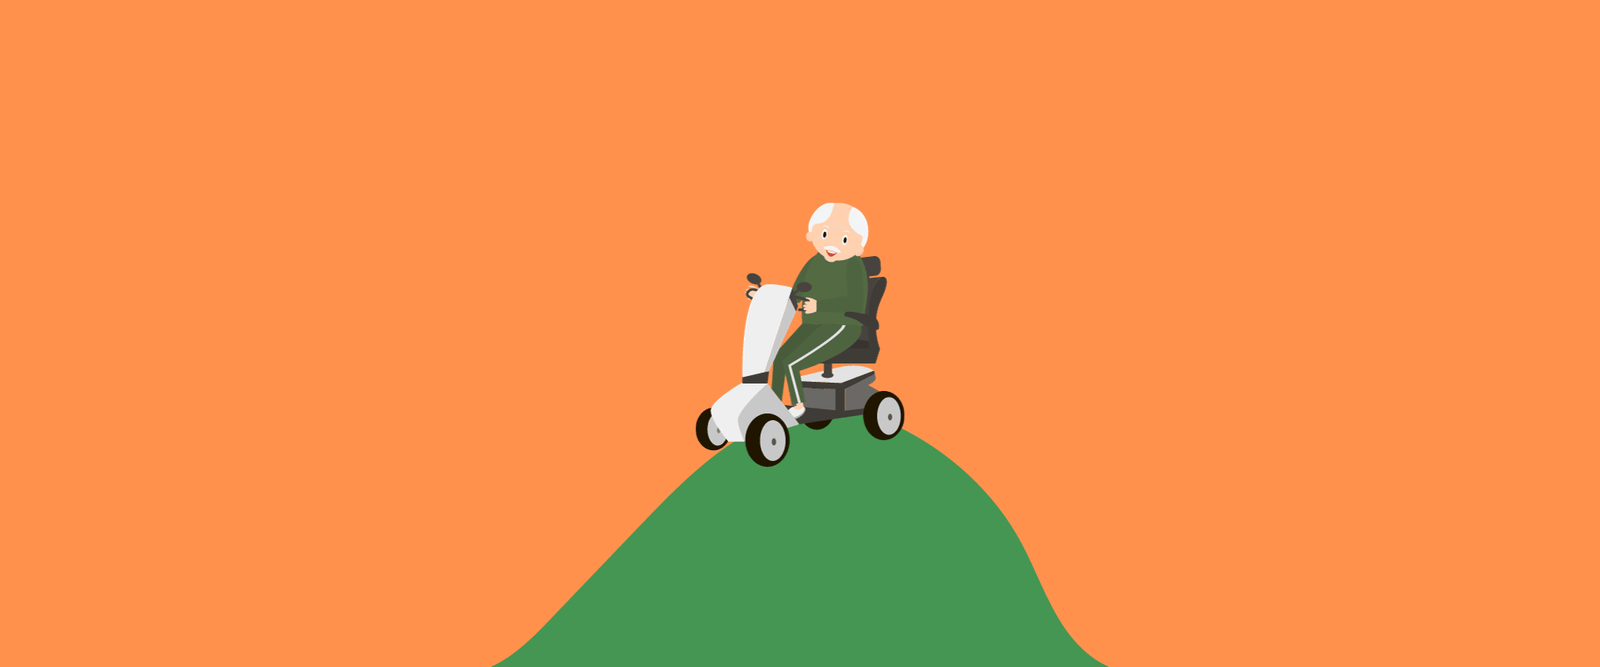 Can mobility scooters go up hills